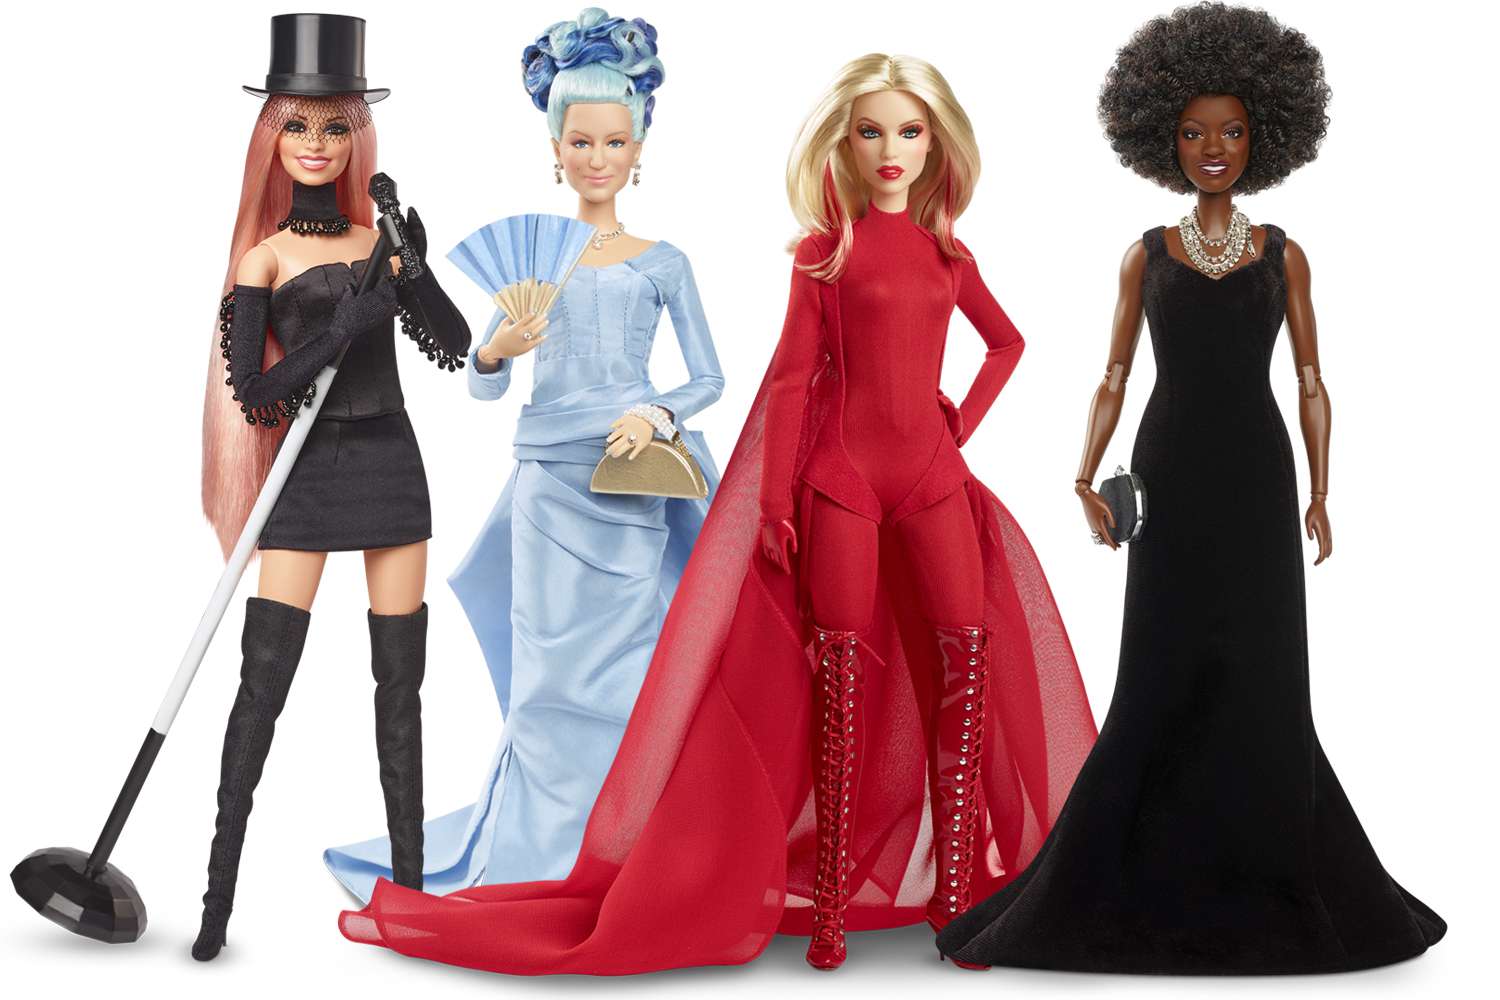 Barbie Celebrates Women’s History Month With ‘Role Model’ Dolls